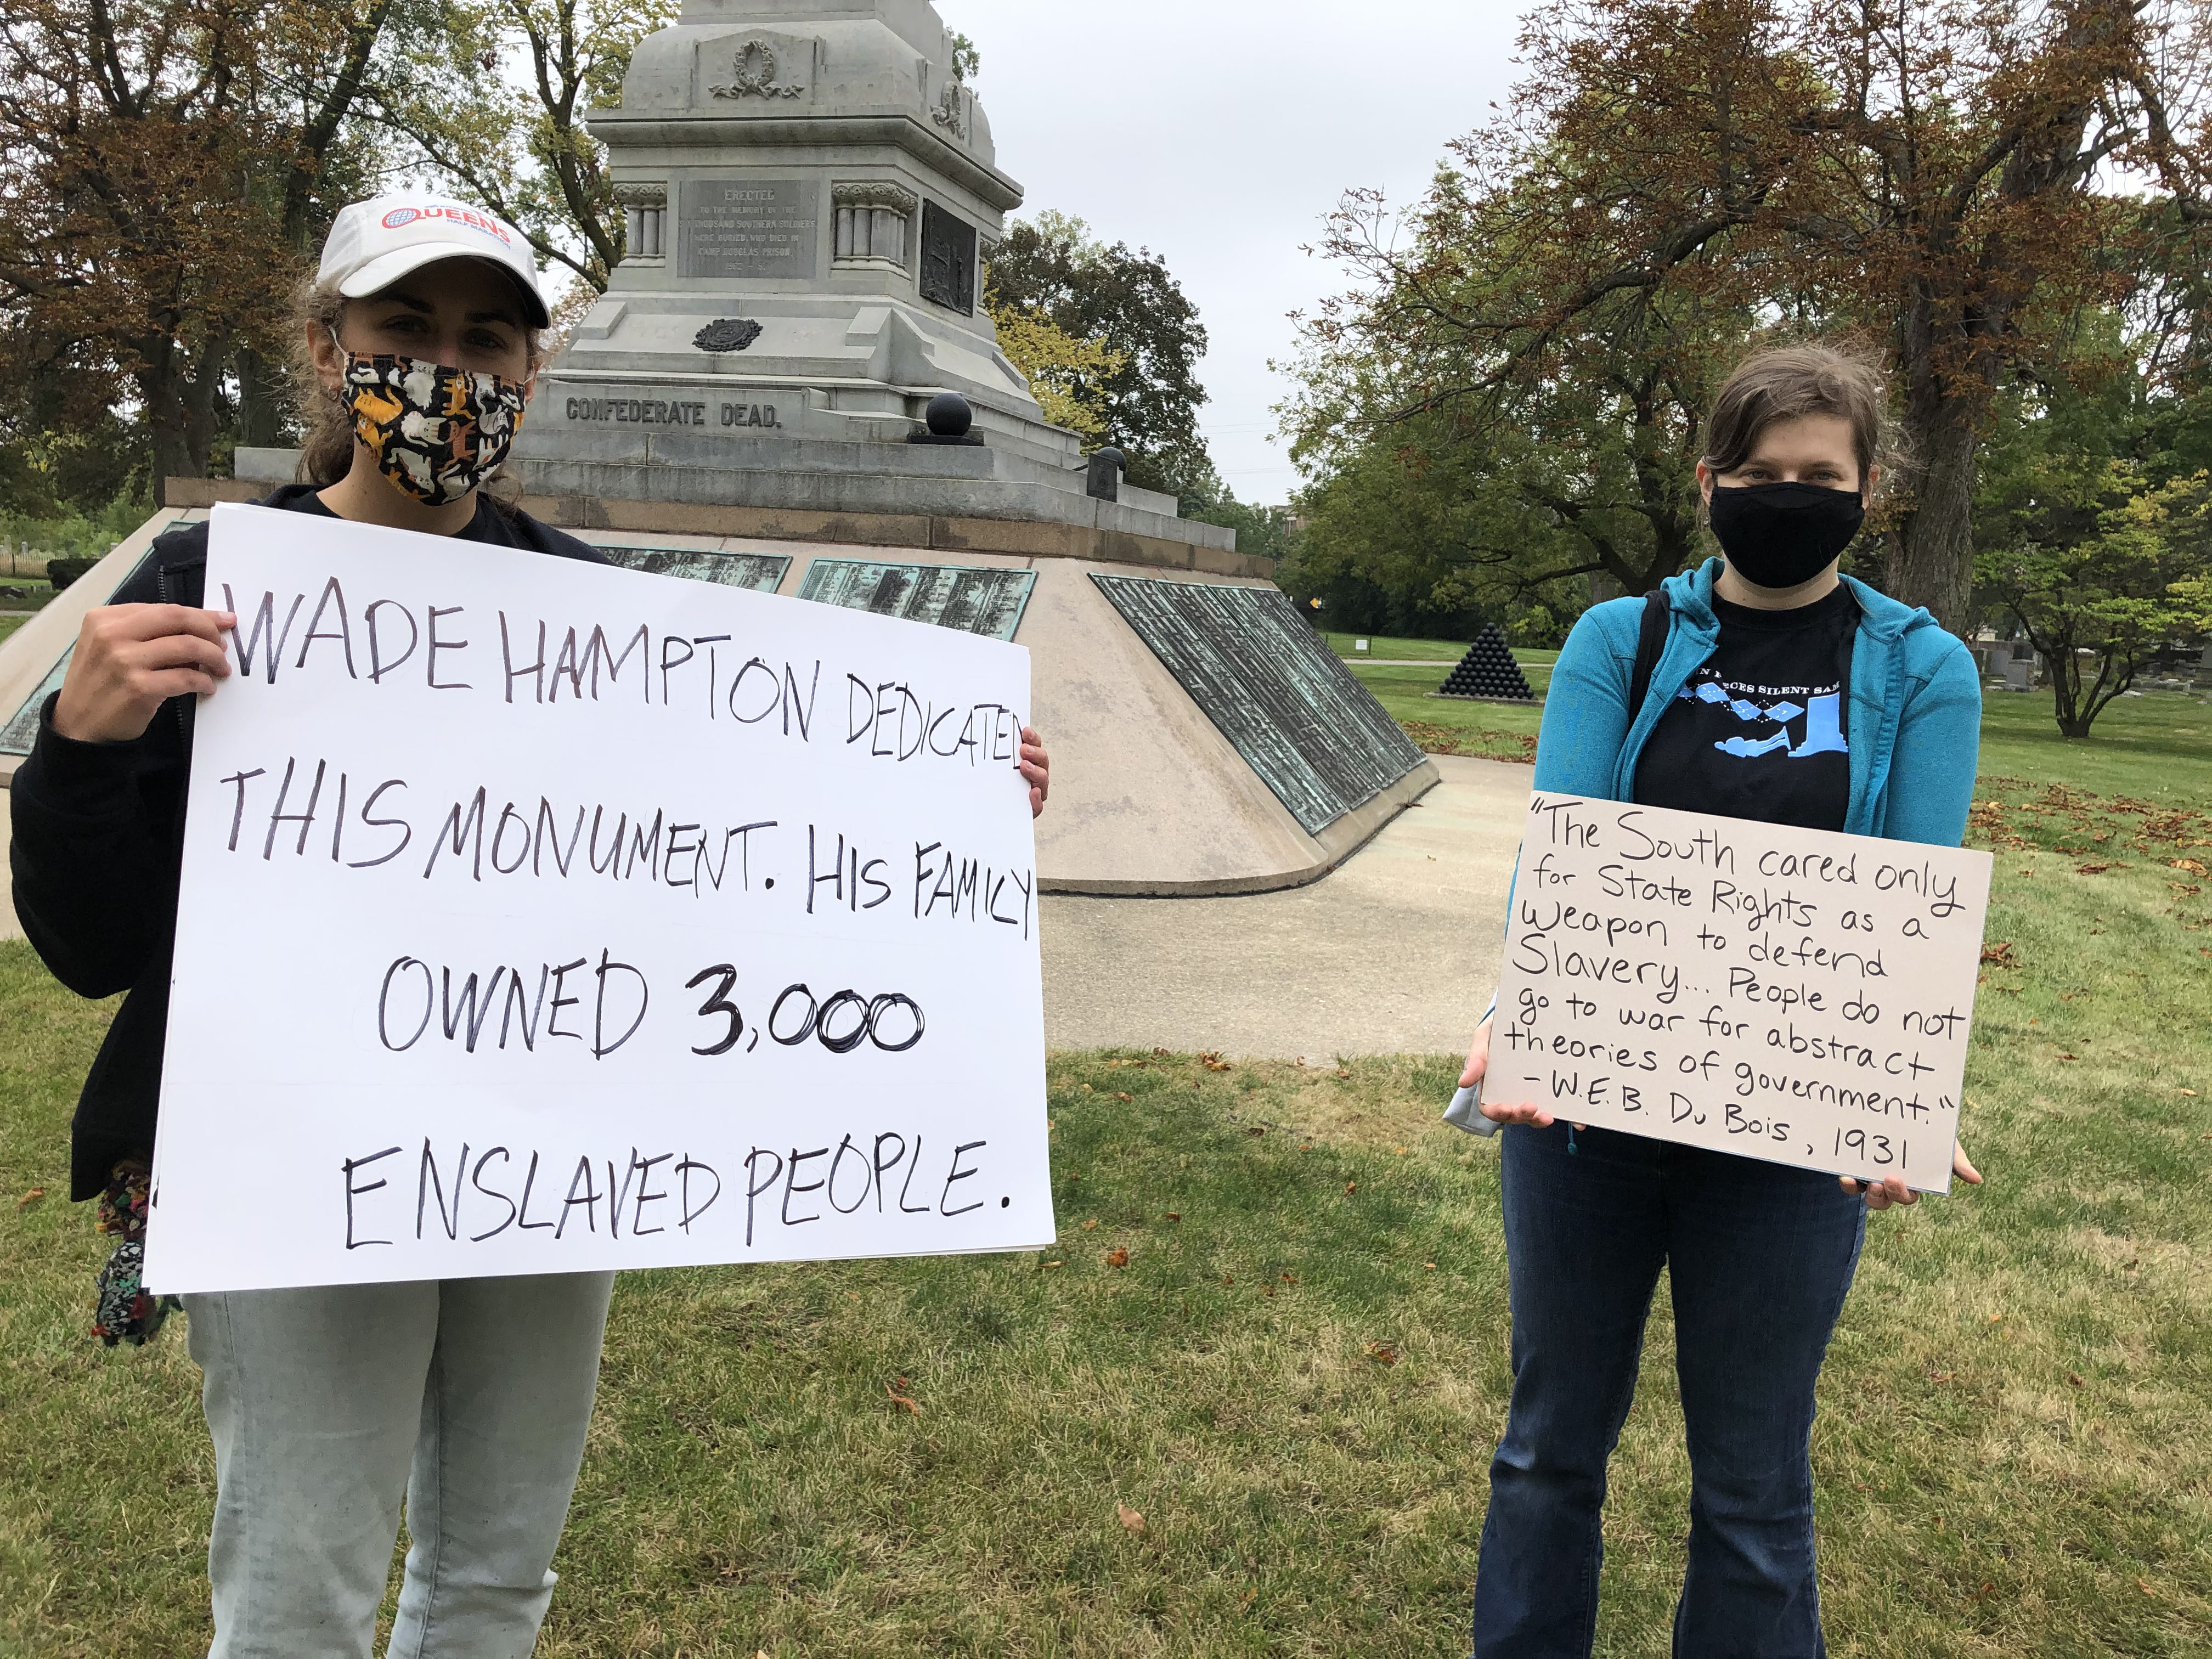 Northwestern University doctoral students Hope McCaffrey, left, and Heather Menefee, right, participated in a #WeWantMoreHistory event at Chicago’s Confederate Mound.